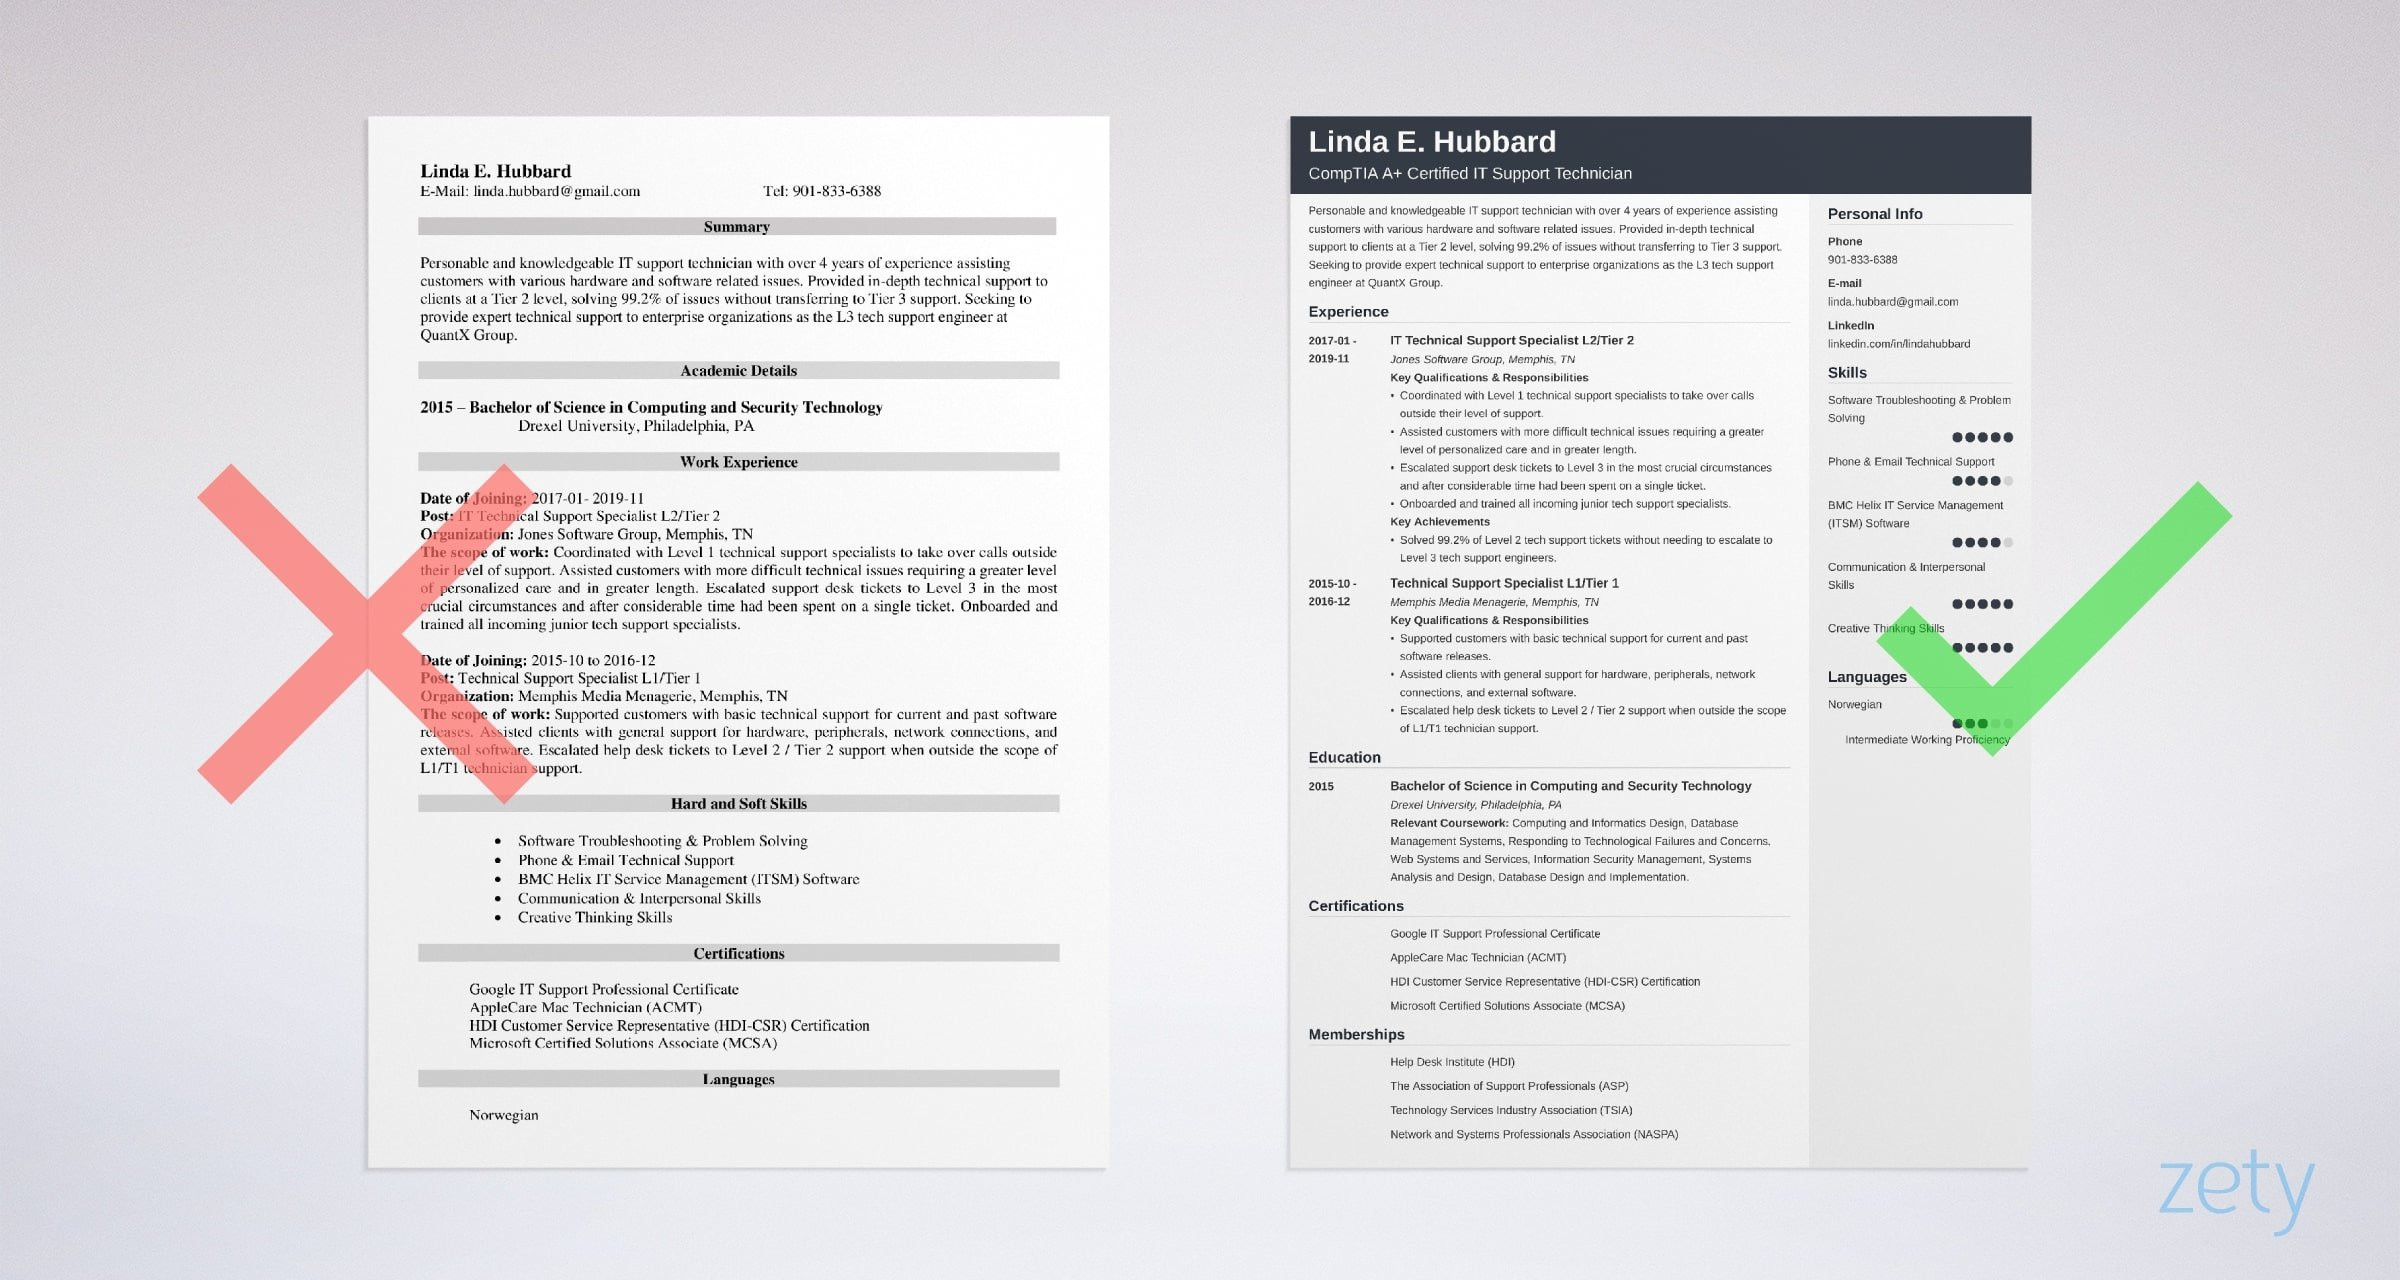 Technical Support Resume Template and Sample Technical Support Resume Sample & Job Description [20 Tips]